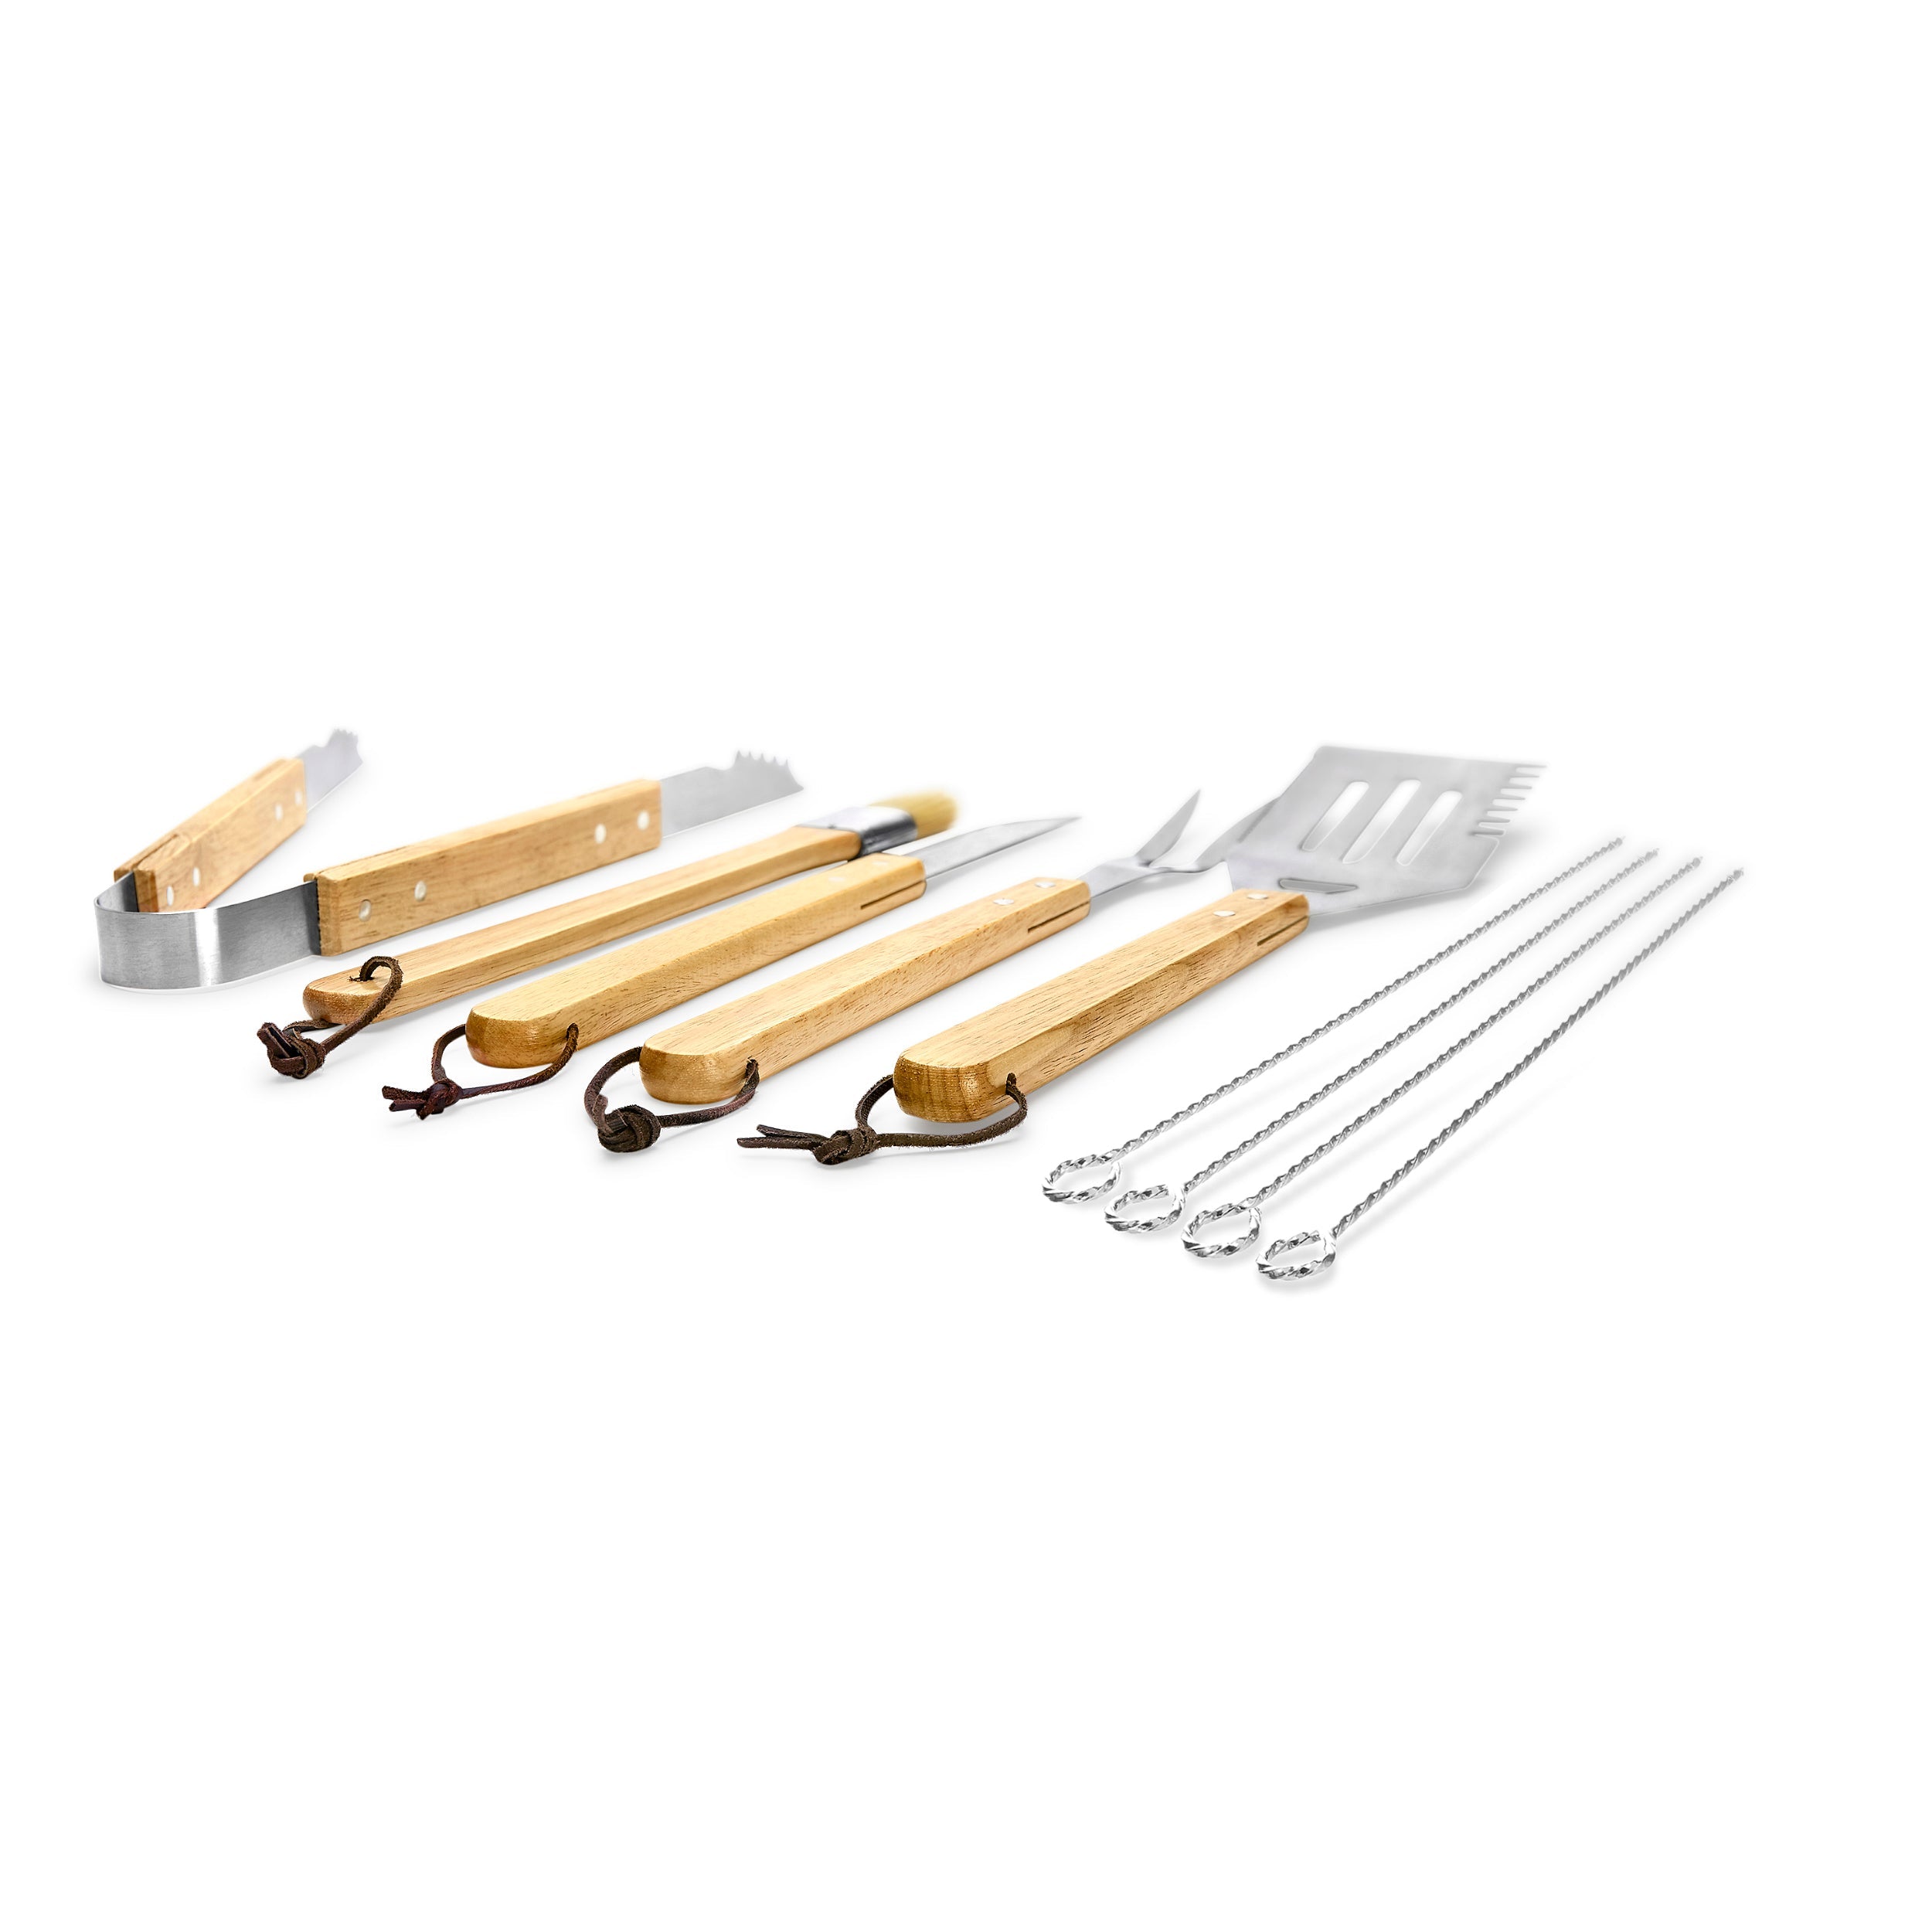 11 Piece BBQ Grill Set - The Grill Master